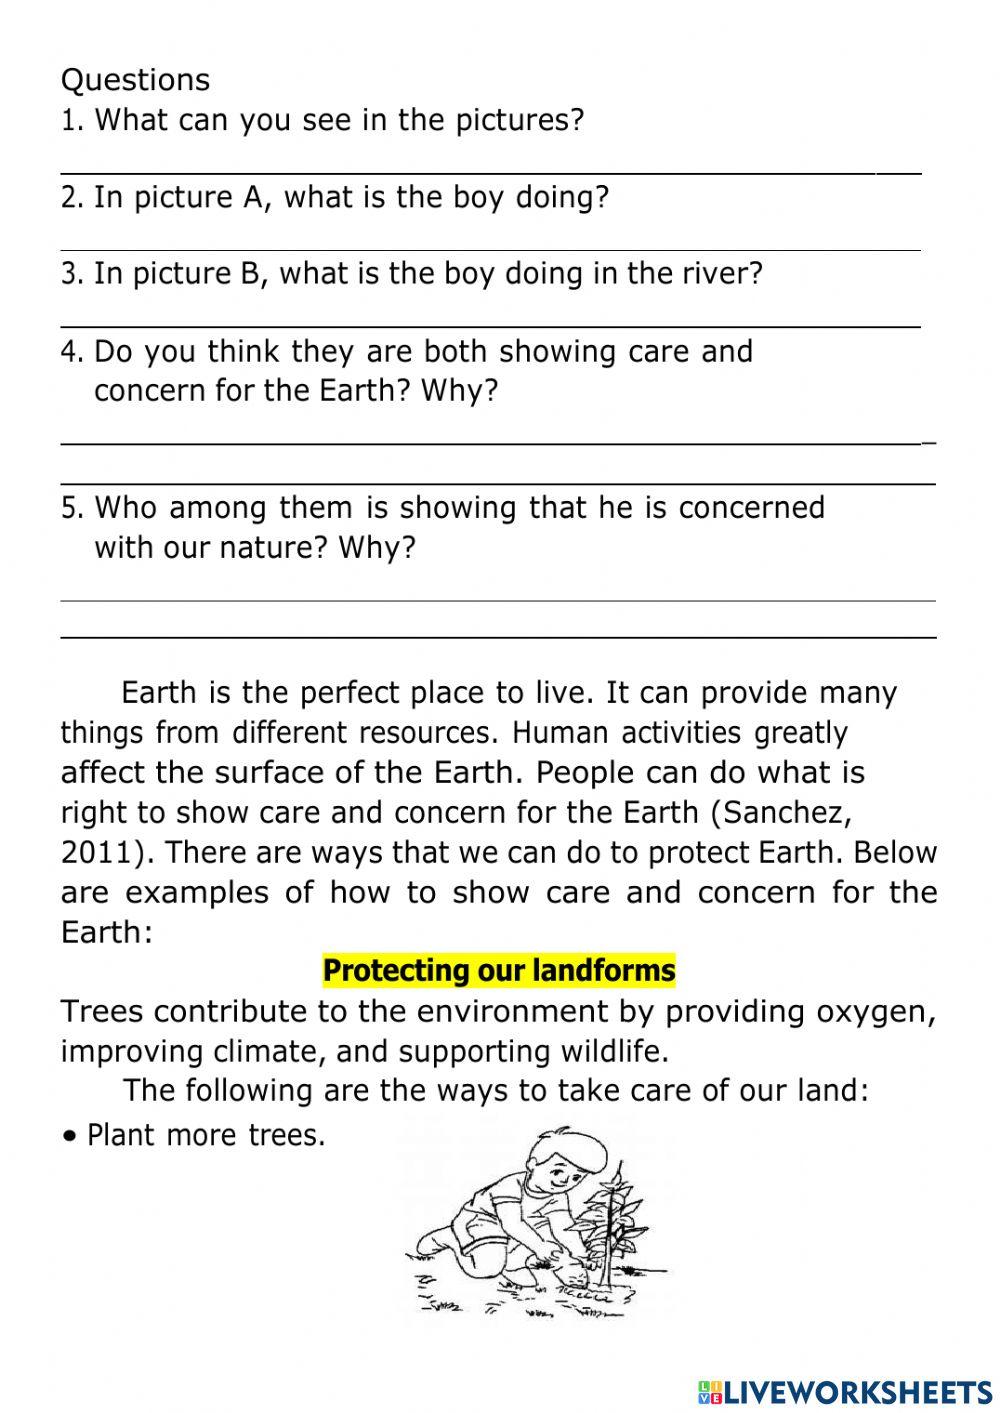 Care and Concern for the Earth After going through this LAS, you are expected to: 1.	Enumerate the ways of showing care and concern for the Earth- 2.	Explain the importance of showing care and concern for the Earth- and 3.	Practice the ways of showing car